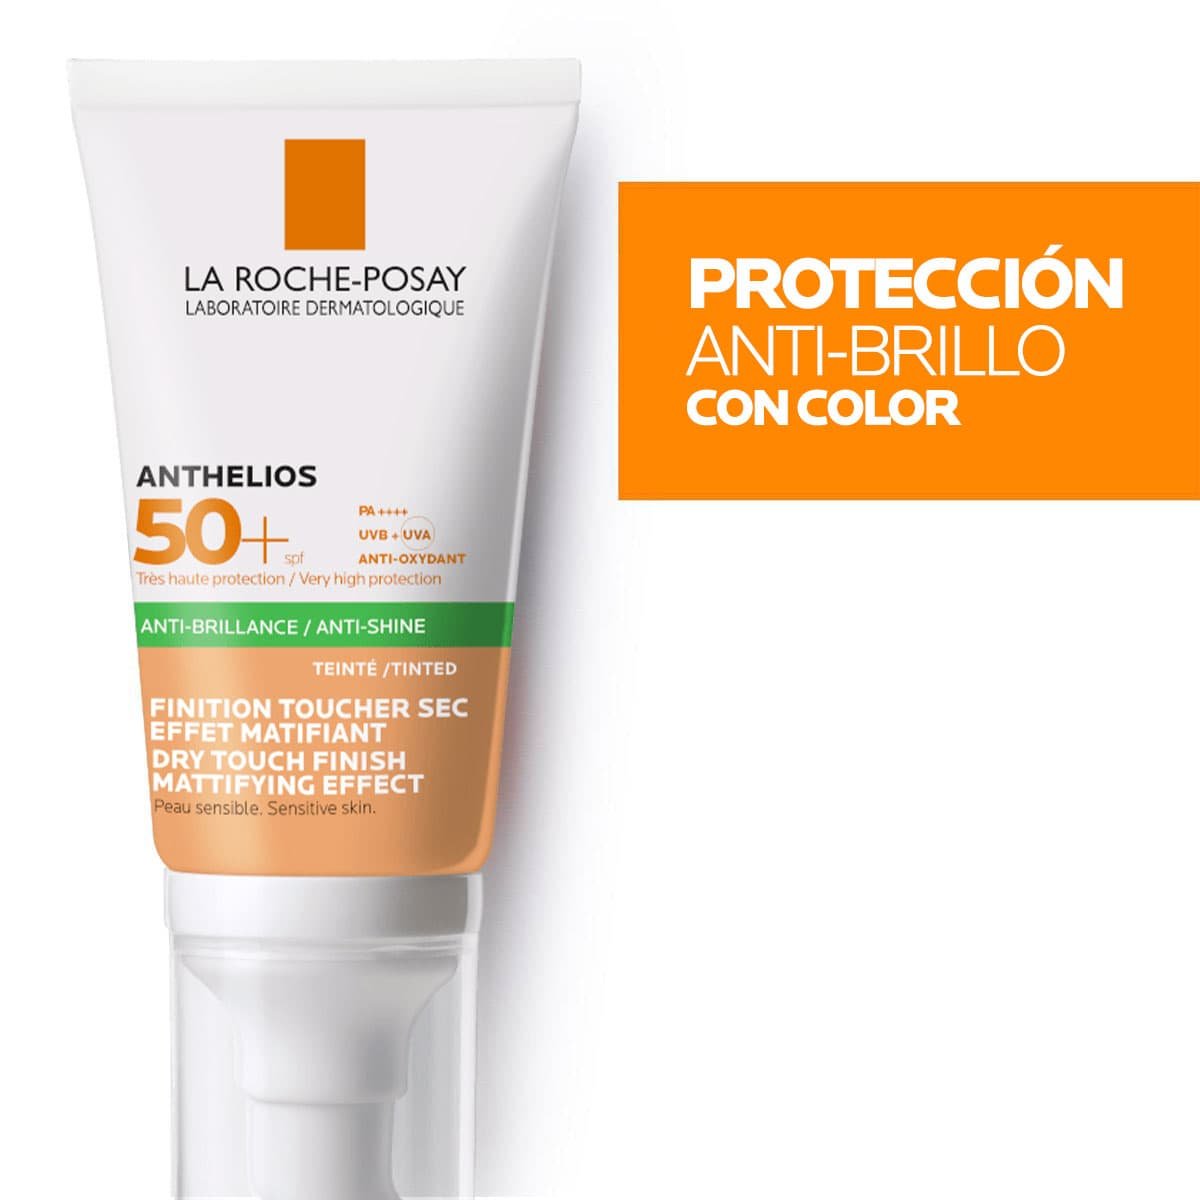 La Roche Posay ProductPage Sun Anthelios XL Tinted Dry Touch Spf50 50m